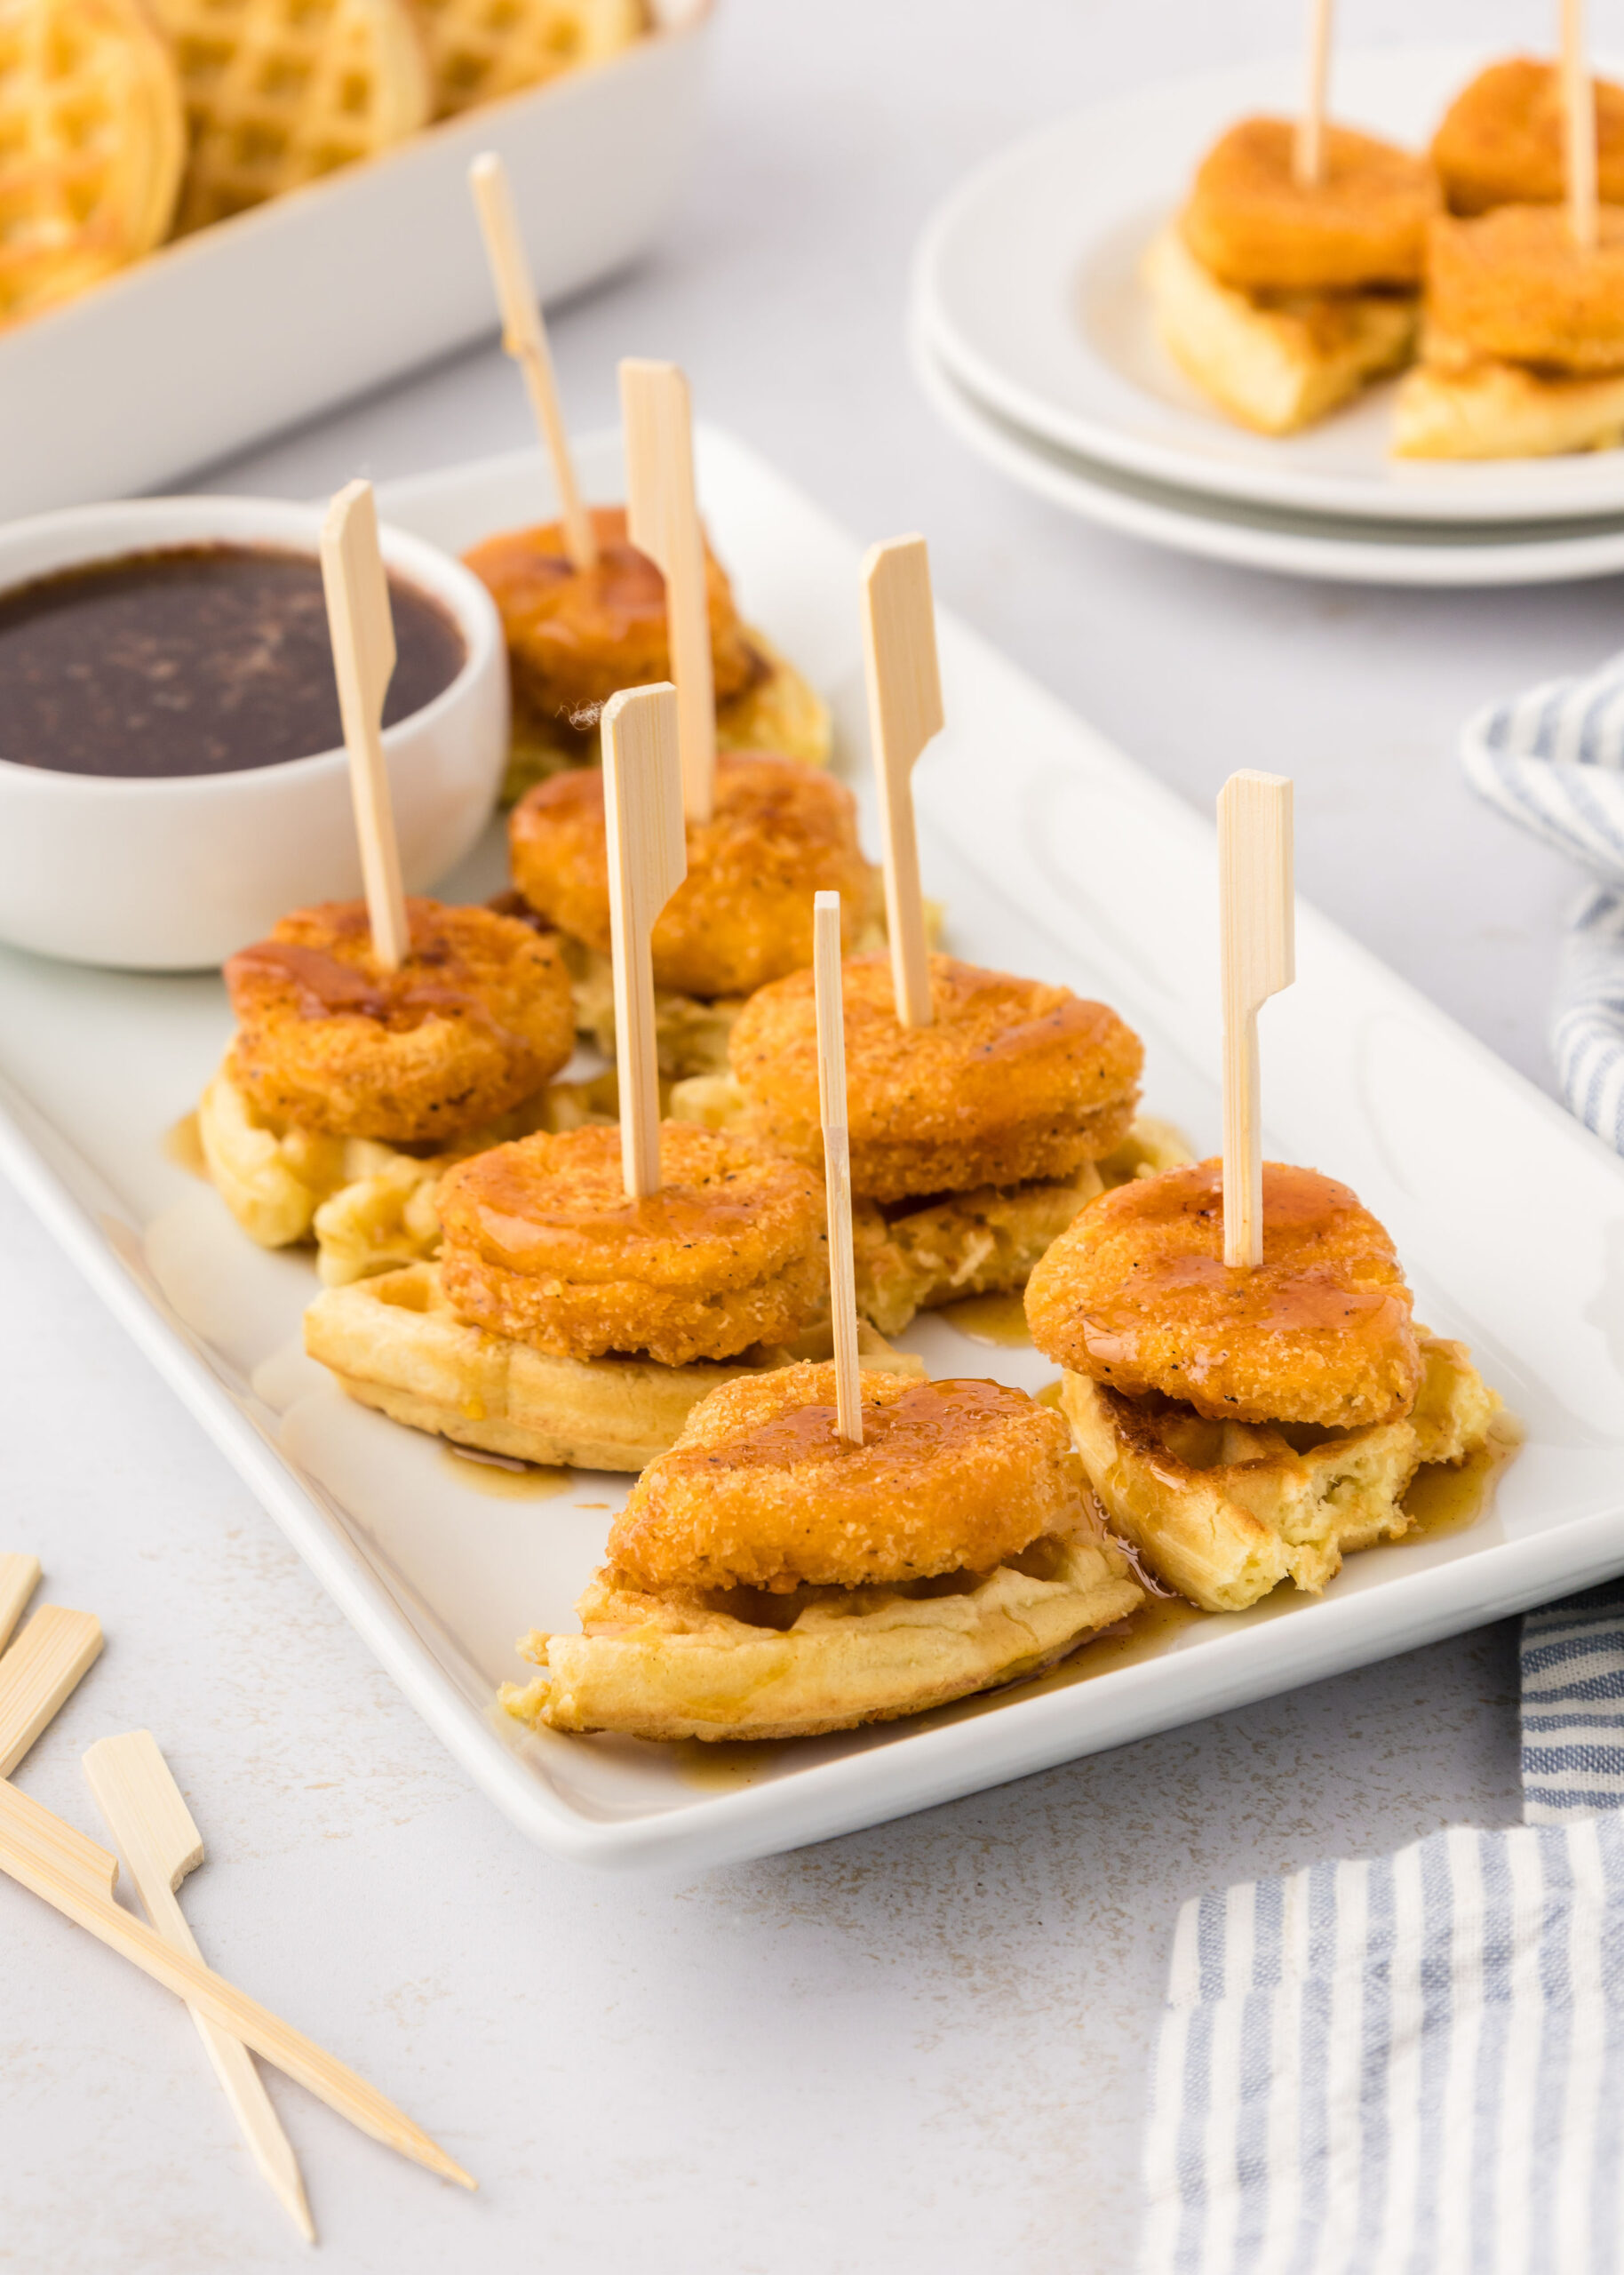 chicken and waffles bites (chicken and waffle appetizer)